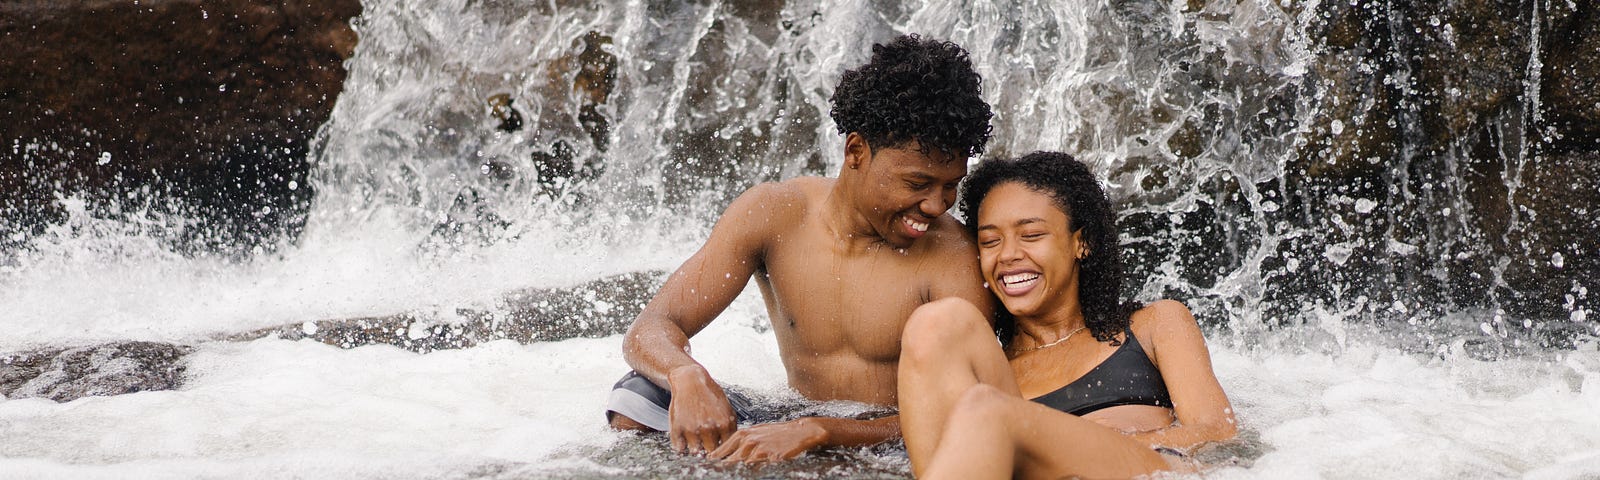 A couple in the water, near a waterfall